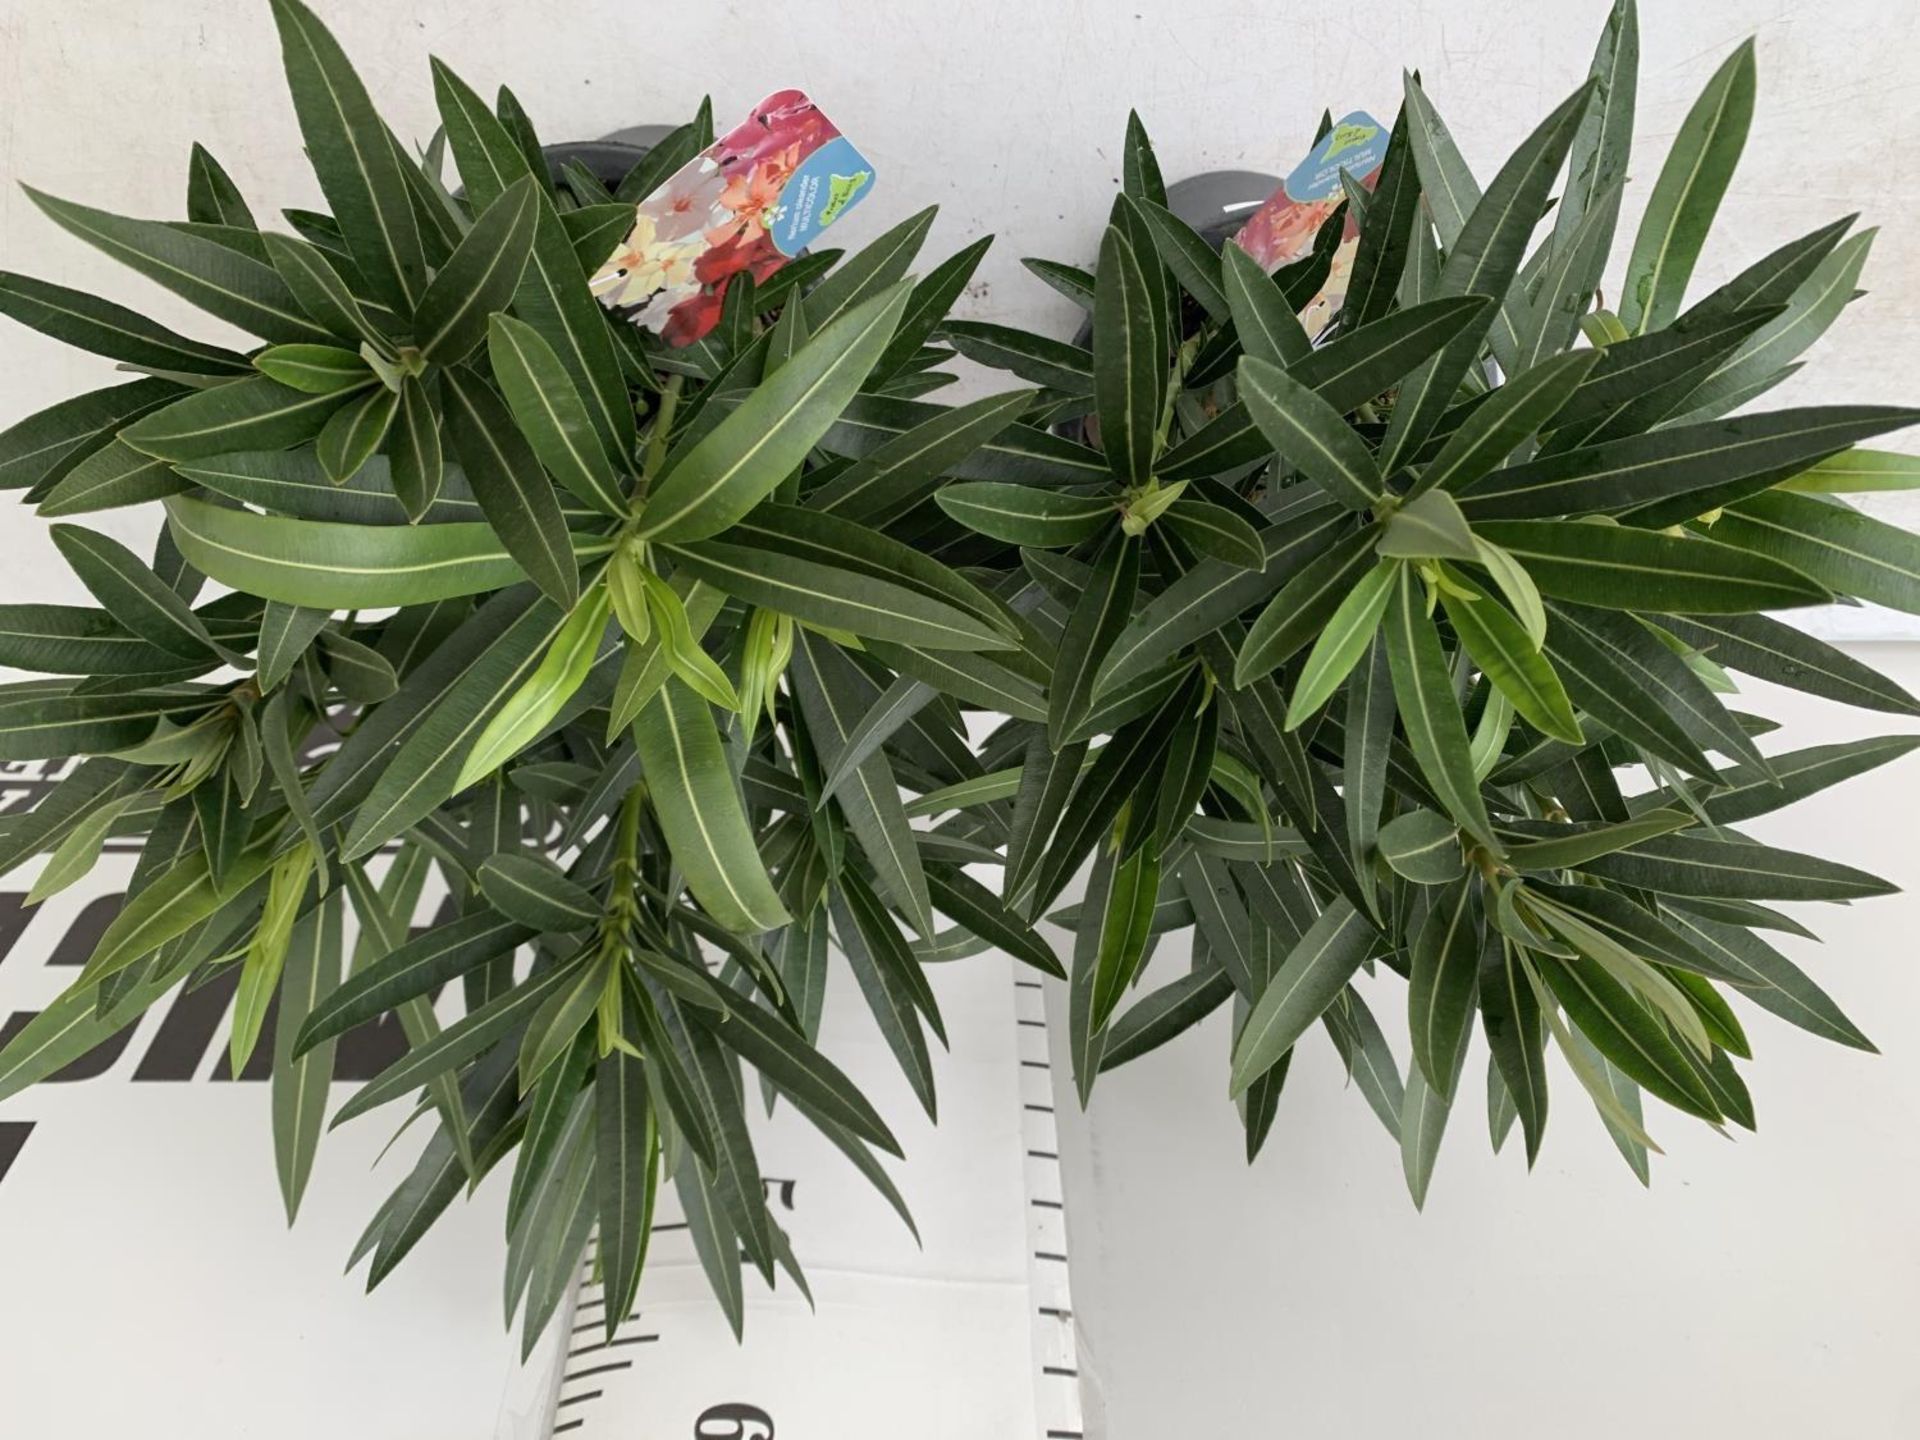 TWO OLEANDER NERIUM SHRUBS MULTICOLOURED APPROX 60CM TALL IN 4 LTR POTS PLUS VAT TO BE SOLD FOR - Image 4 of 10